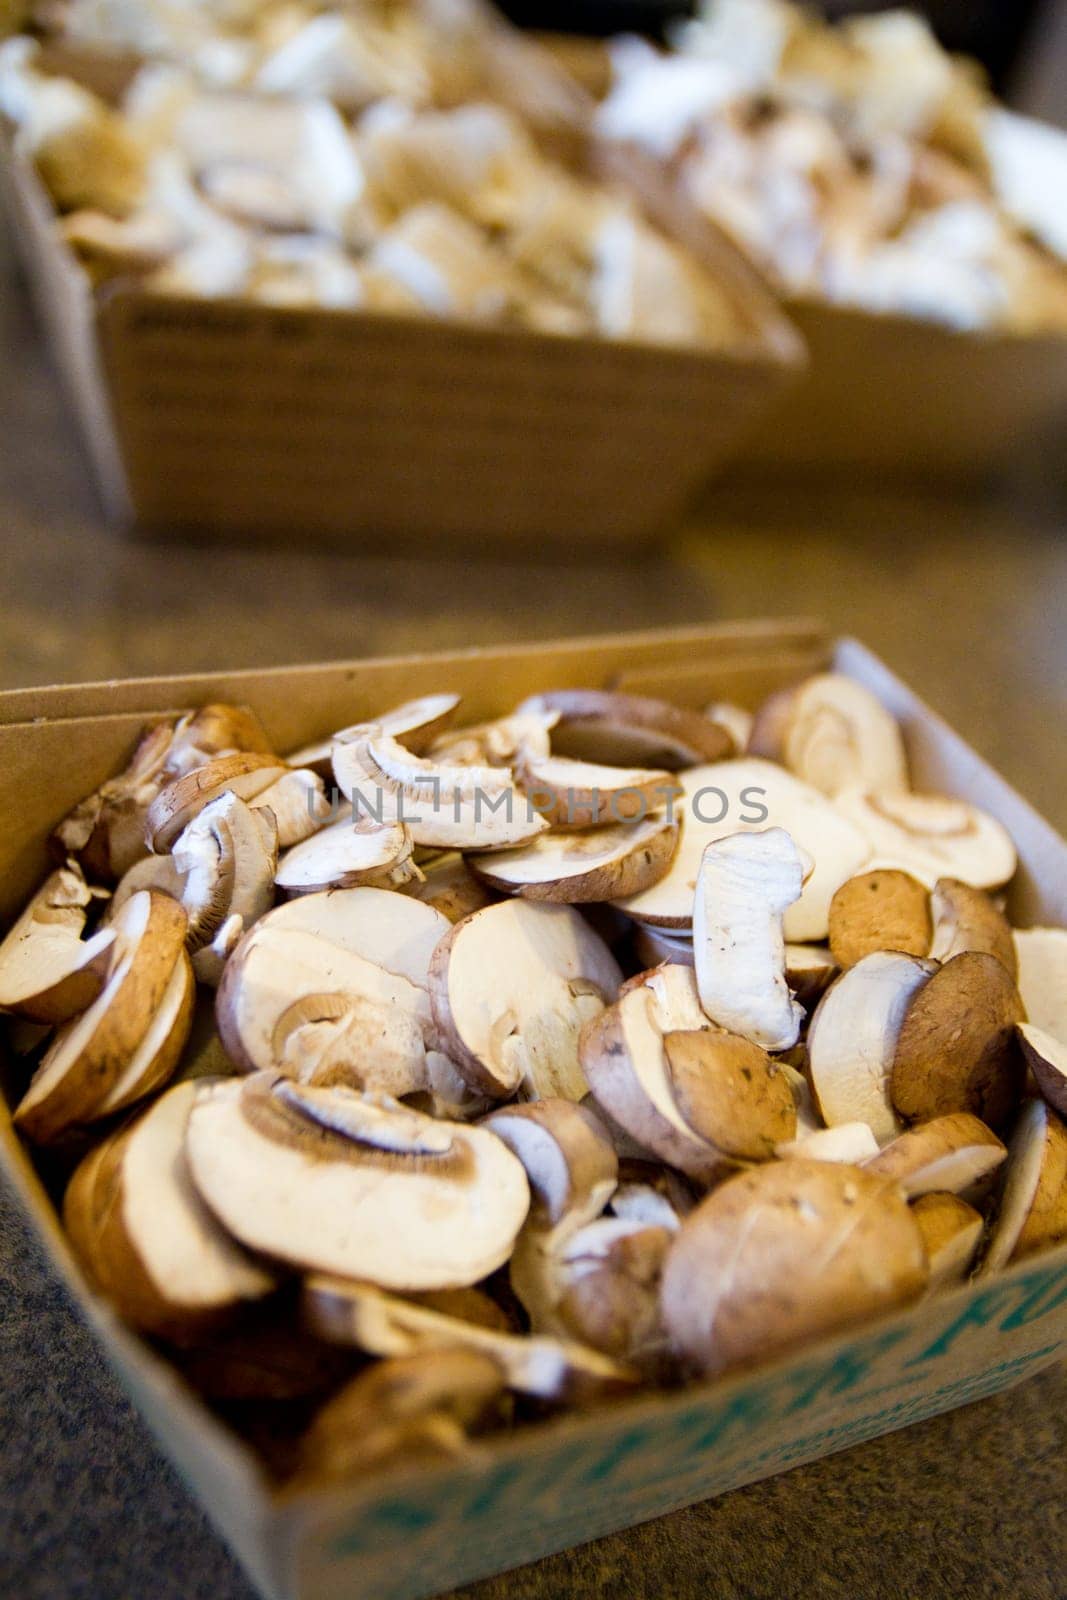 Freshly sliced mushrooms ready for cooking or sale, showcasing their creamy white to light brown hues and intricate gills. This culinary image exudes a natural, organic vibe, perfect for food industry or healthy lifestyle marketing materials.